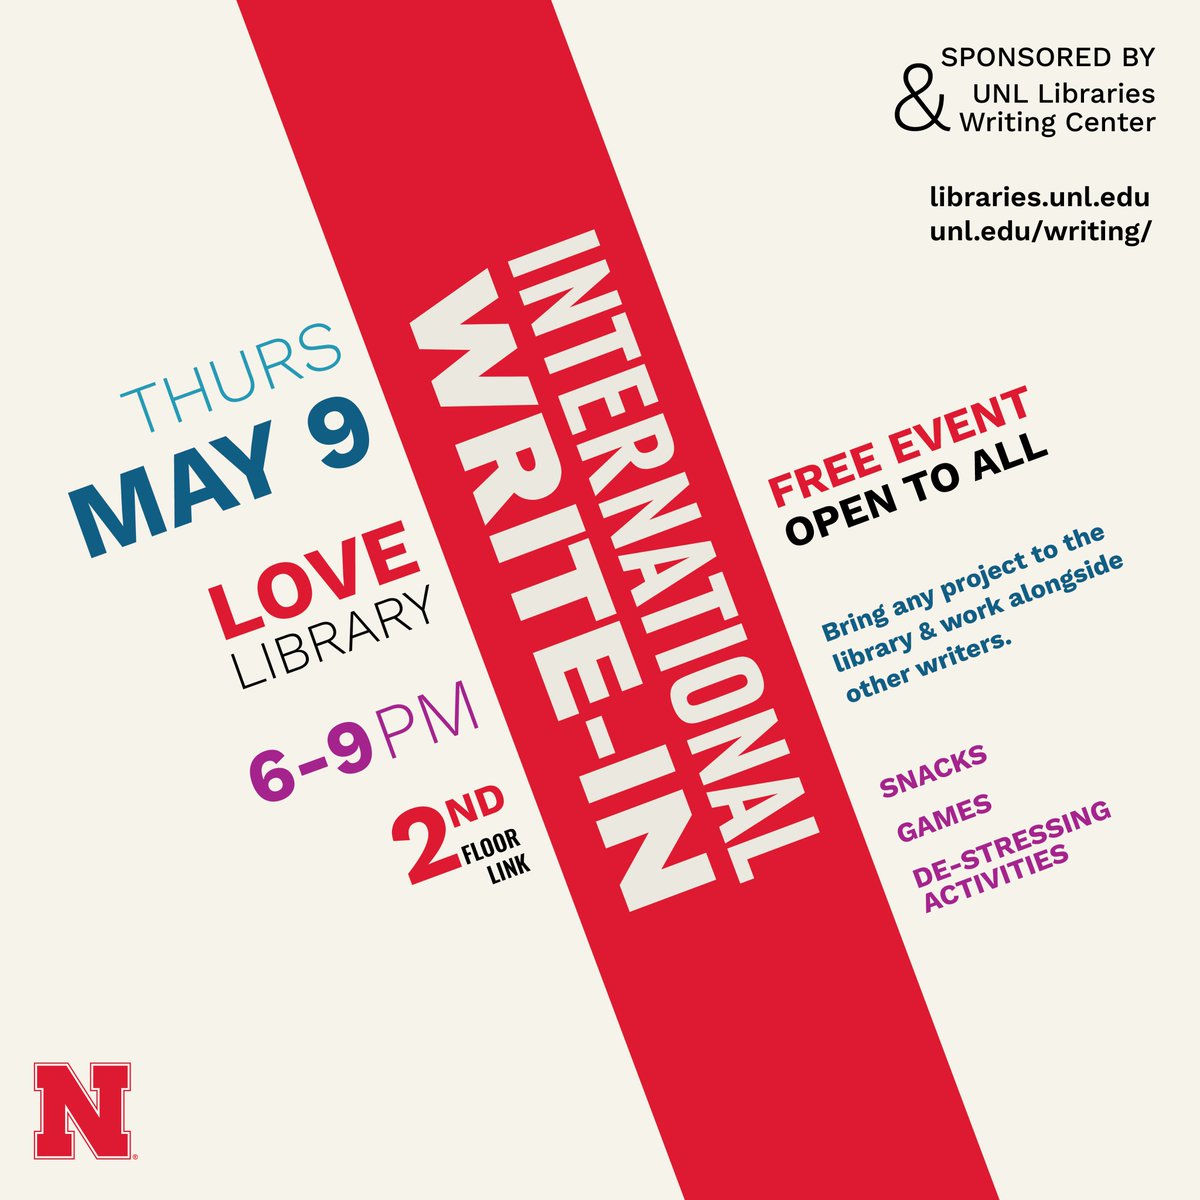 Want some company to finish a writing project you have? Check out this event Thursday! go.unl.edu/73og @UNLwriting @UNL_Lib